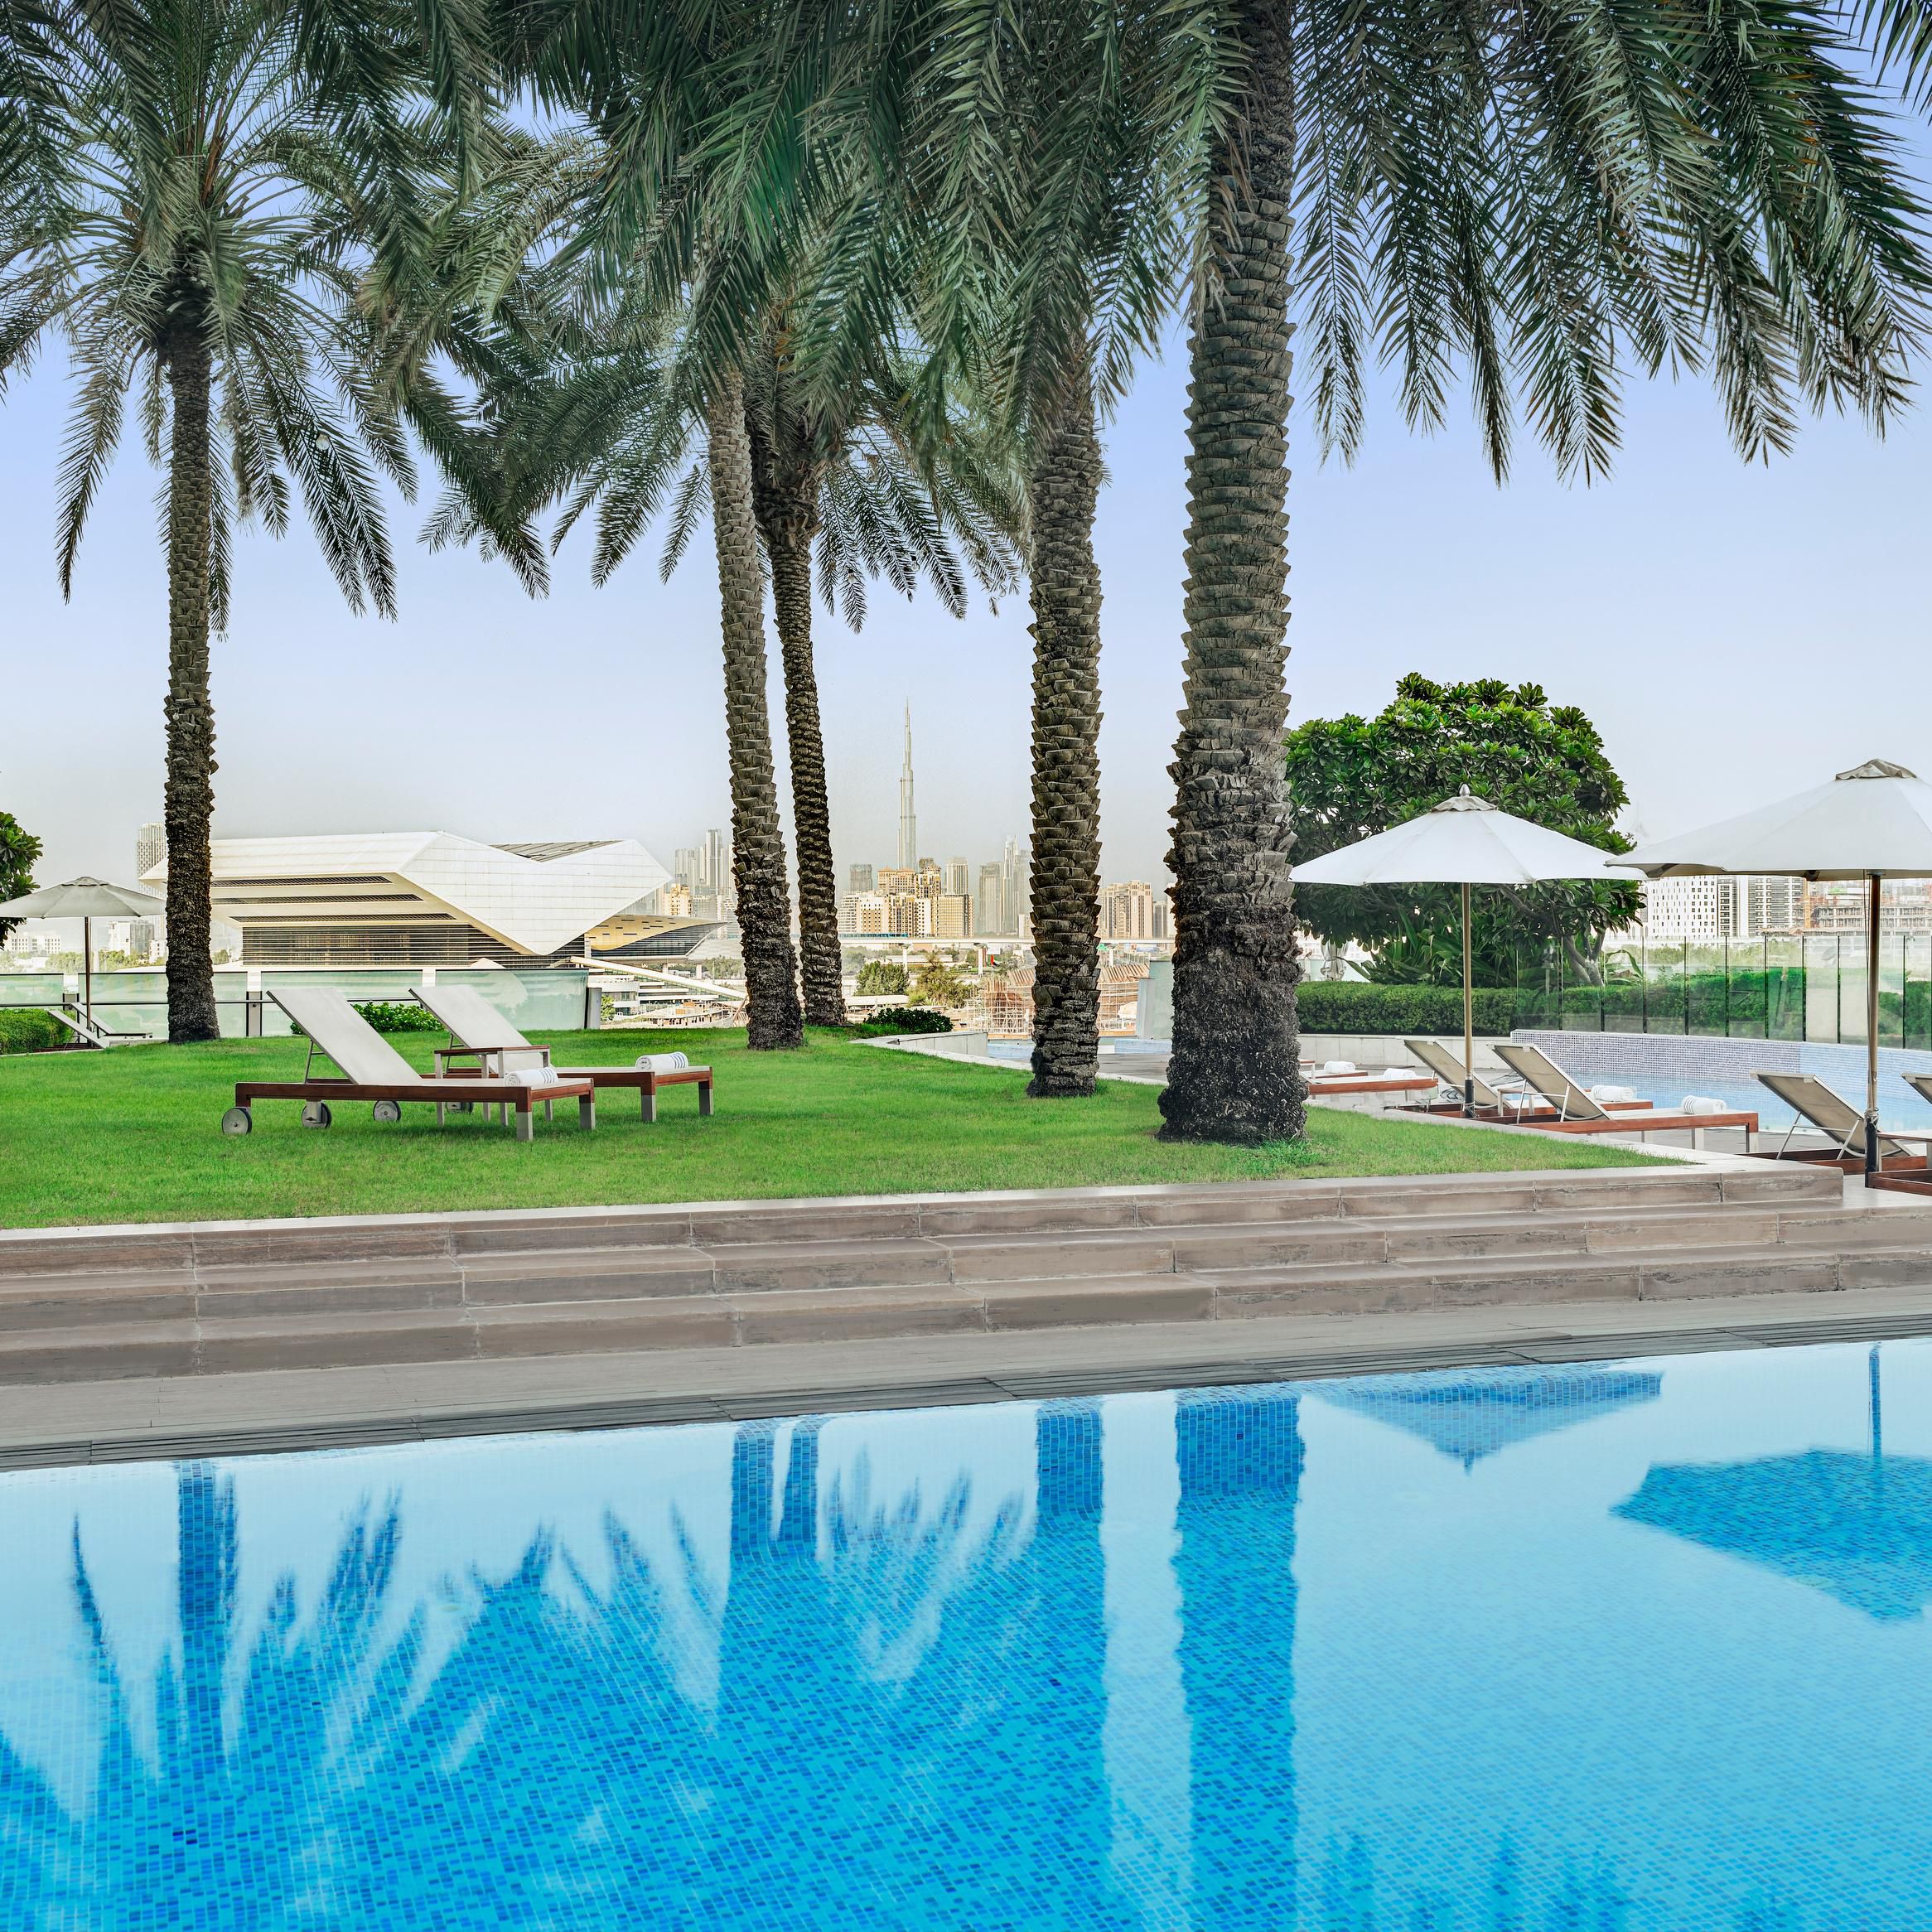 Swim in 25 meter pool and chill under palm trees with city view